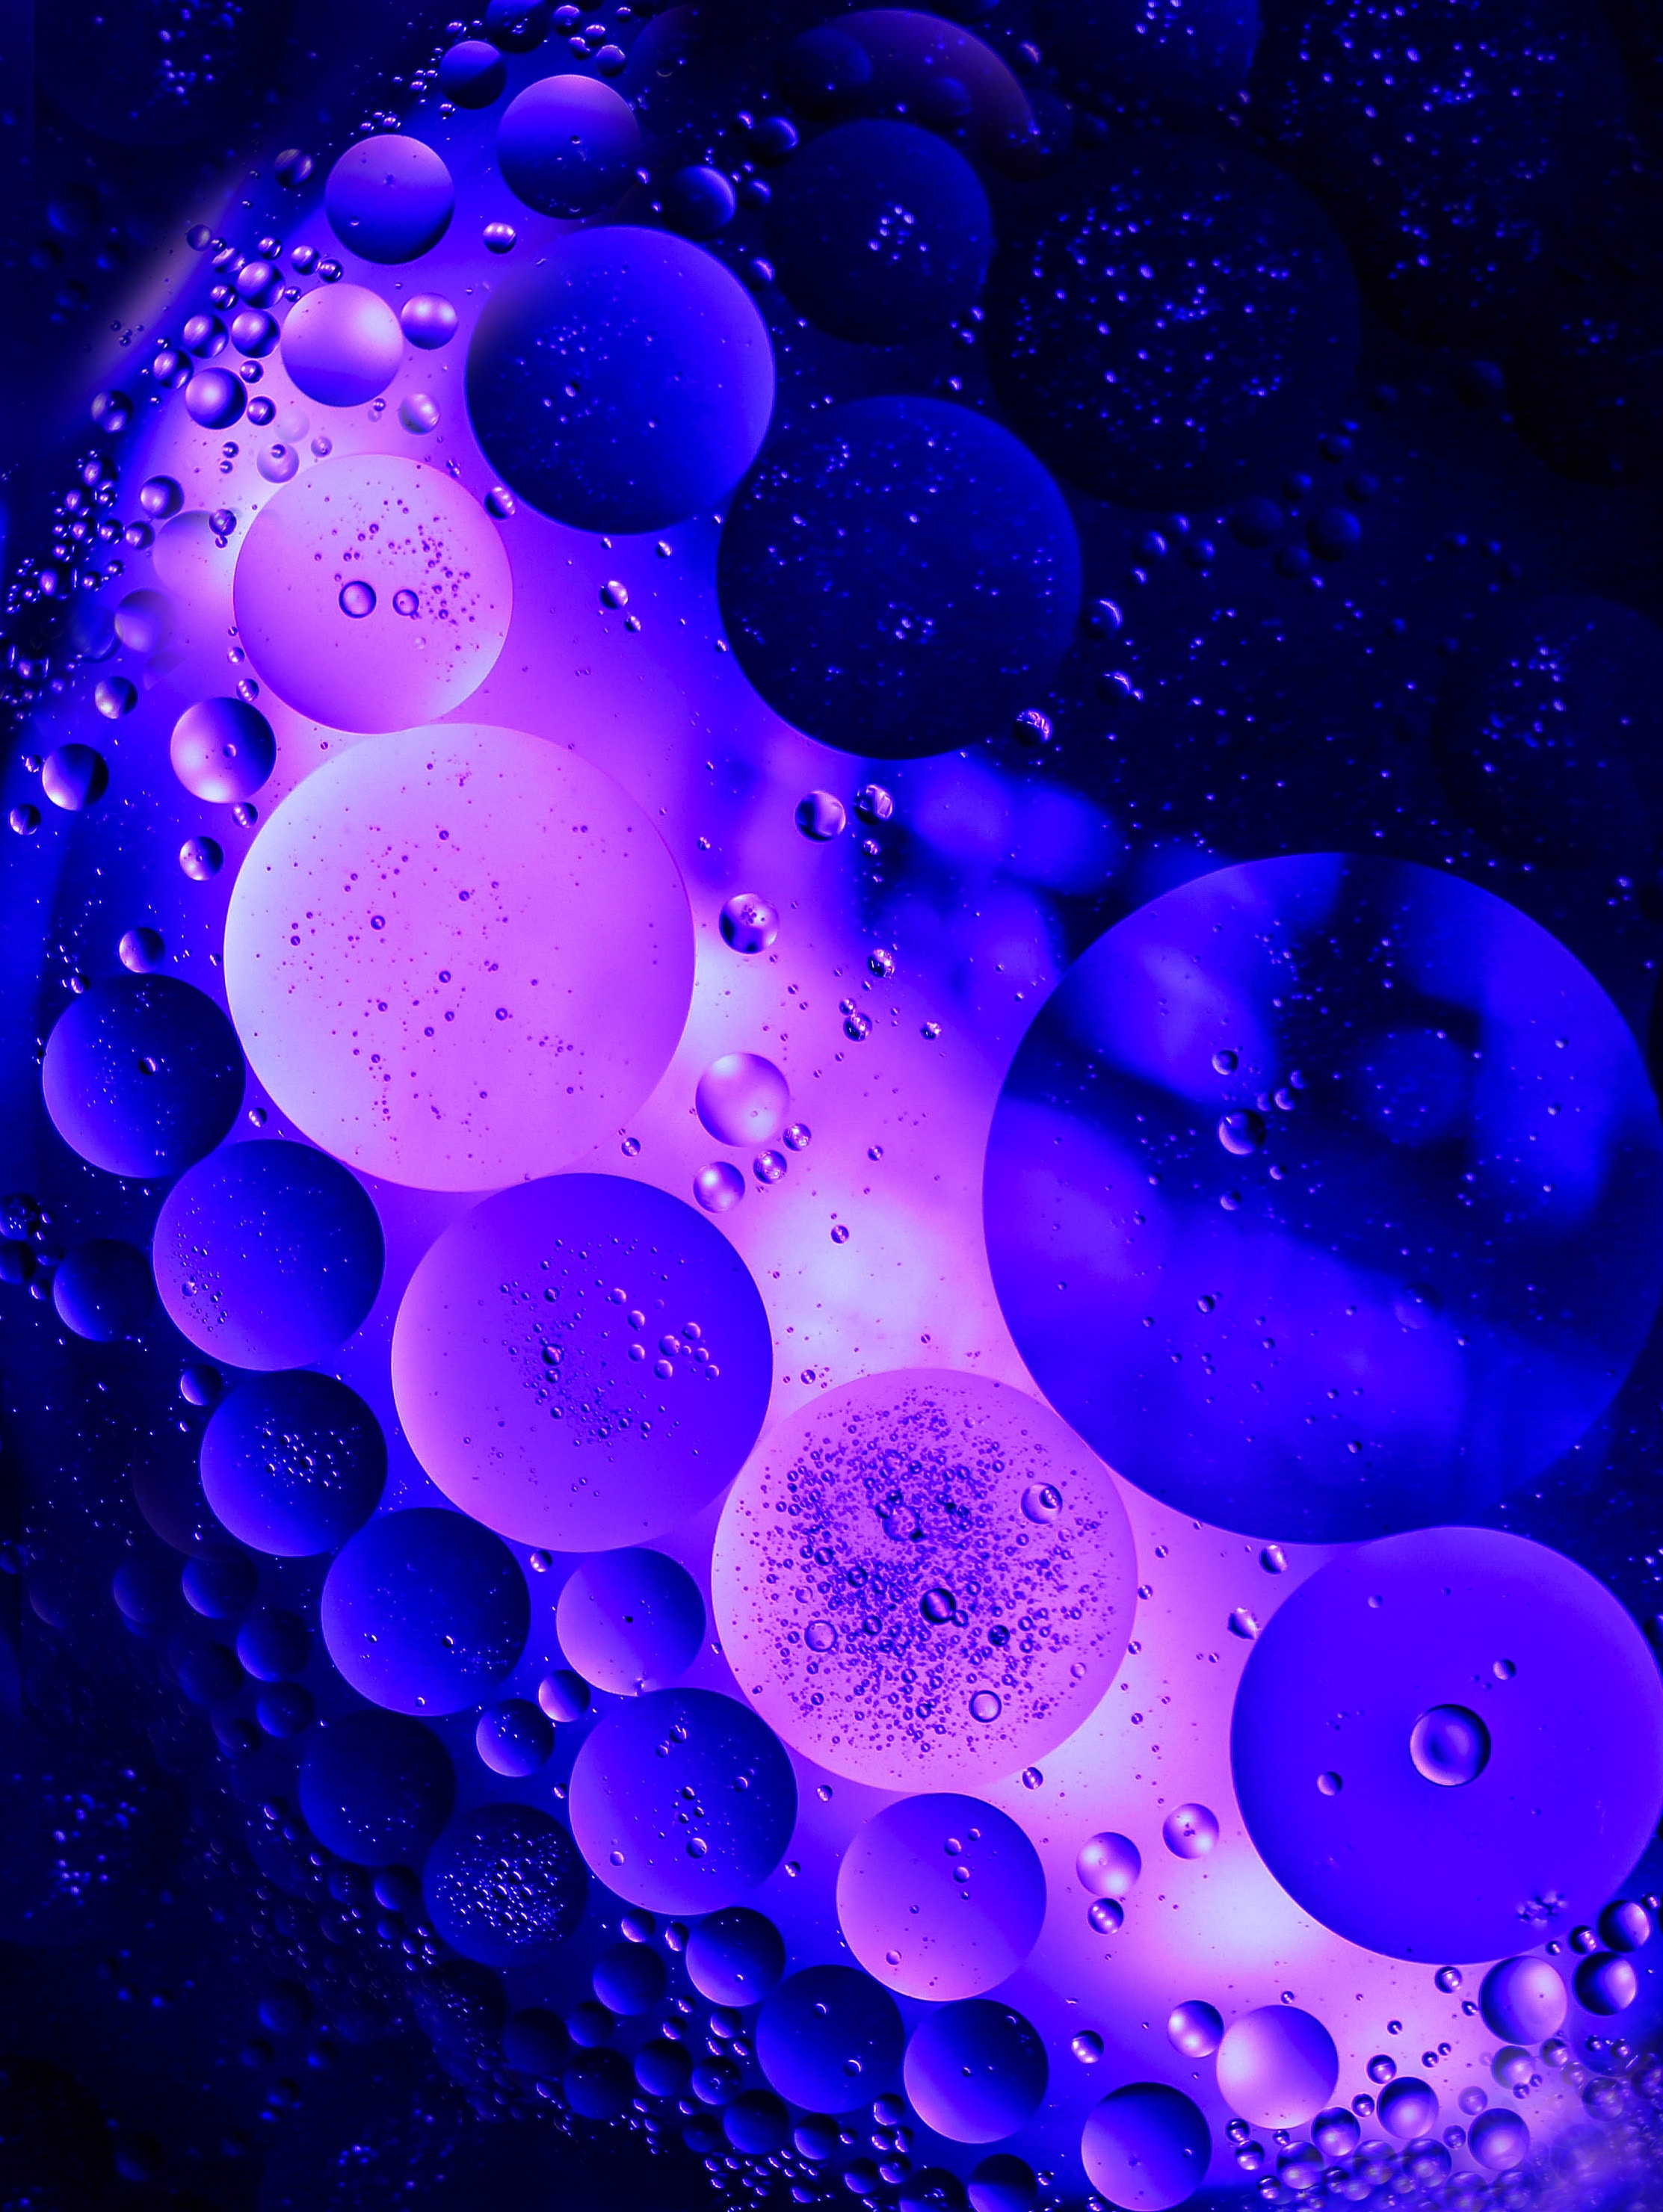 purple, violet, dark, circles, bubbles, macro, form cell phone wallpapers